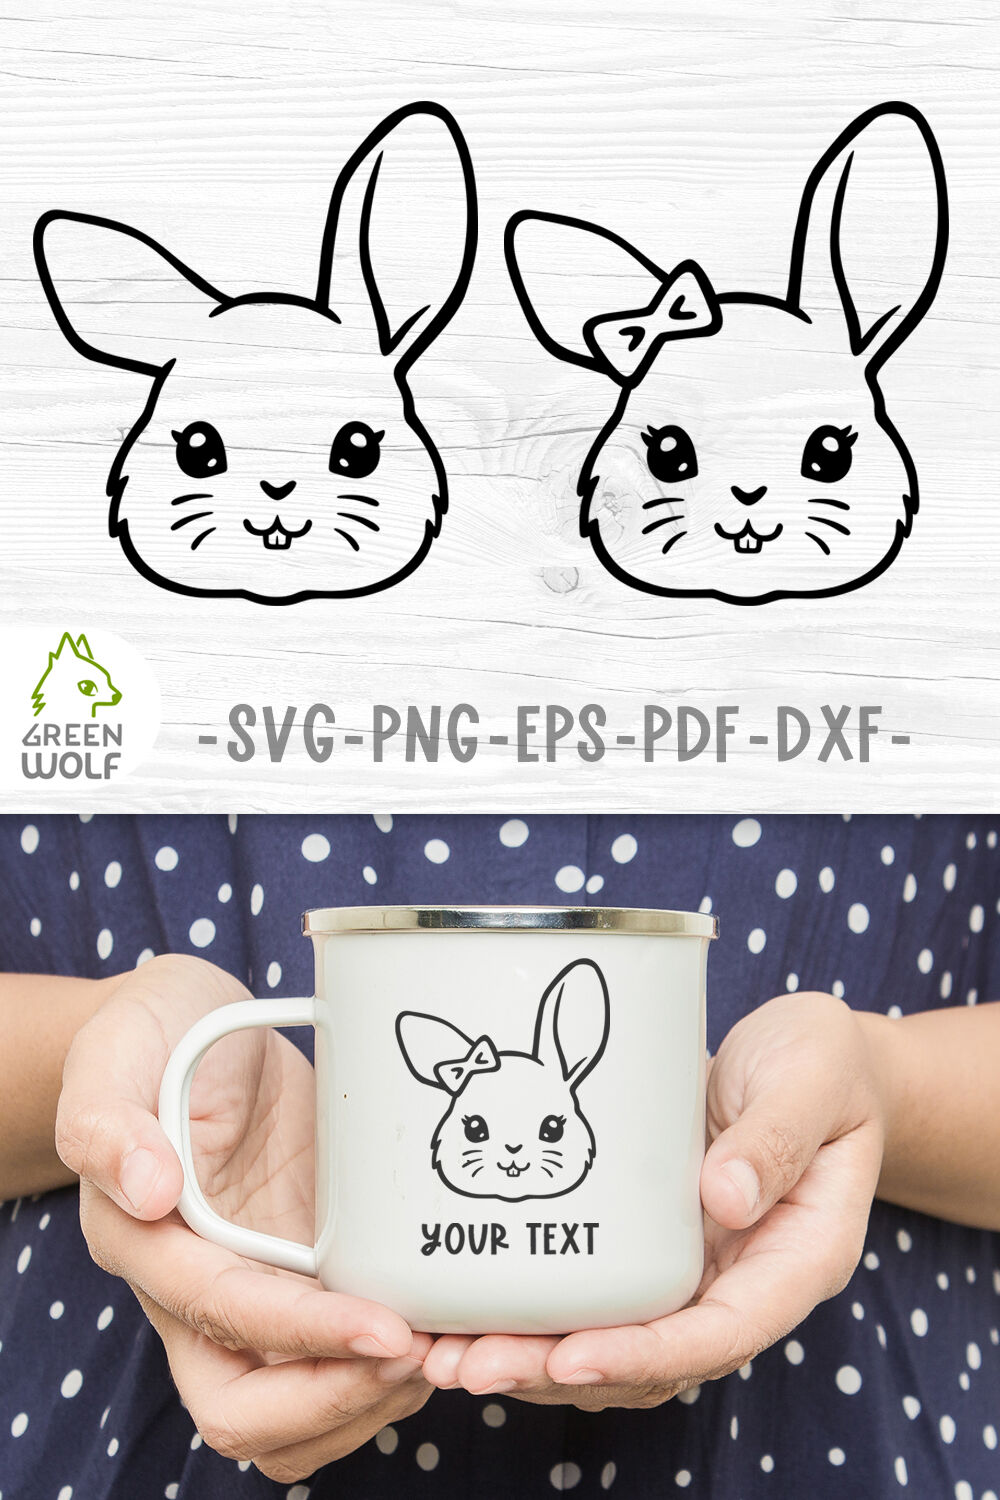 Download Botanical Cut File Animals Svg Mug Cute Cutting File Buy 3 Get 30 Off Cute Bunny And Squirrel Friends Svg Clipart File Cricut Clip Art Art Collectibles